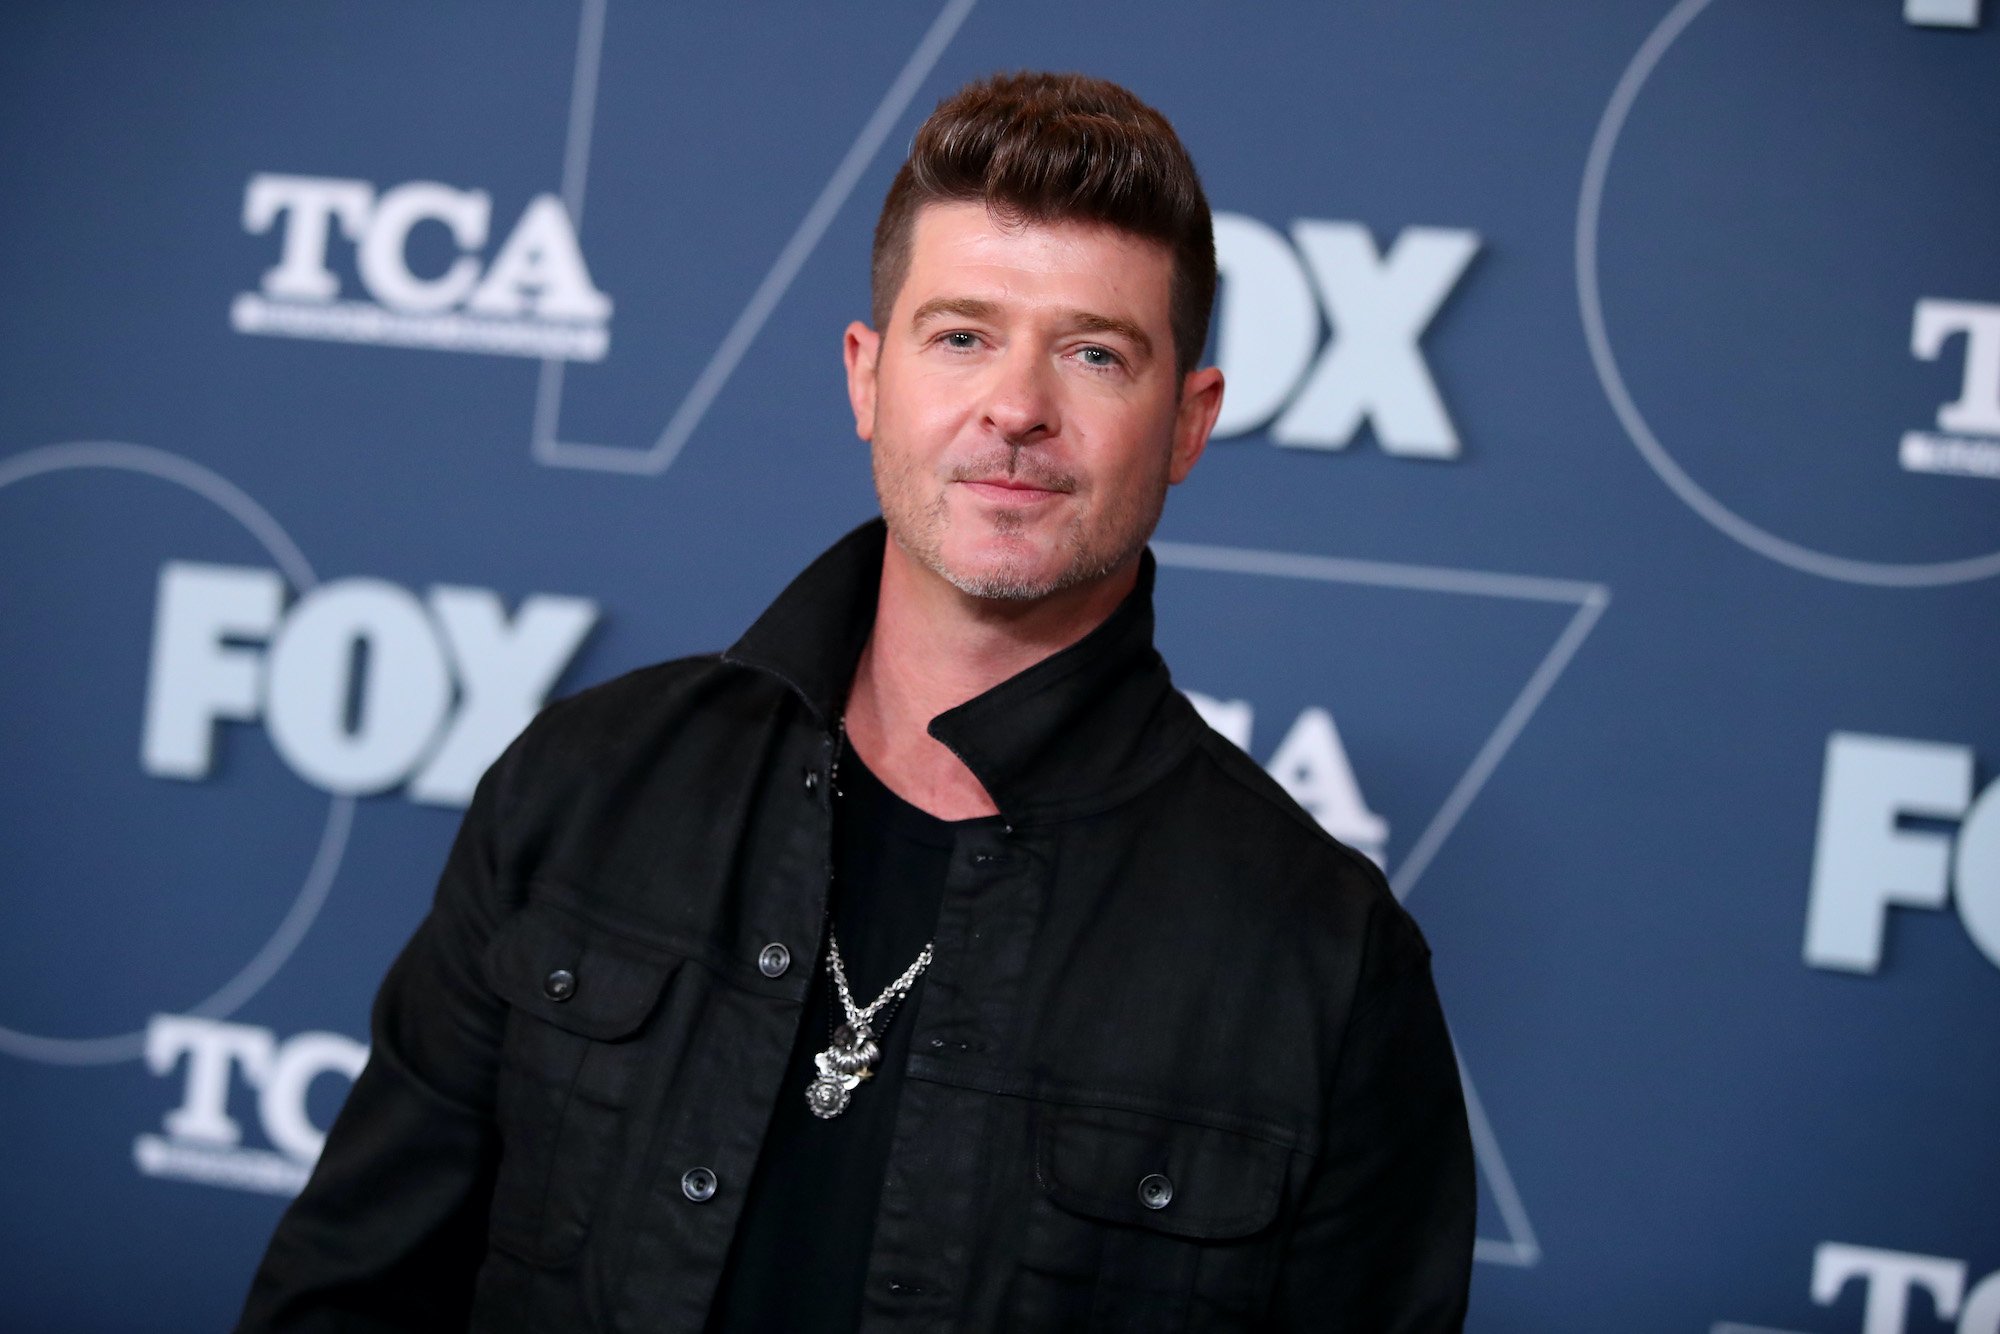 Robin Thicke smiling in front of a blue background